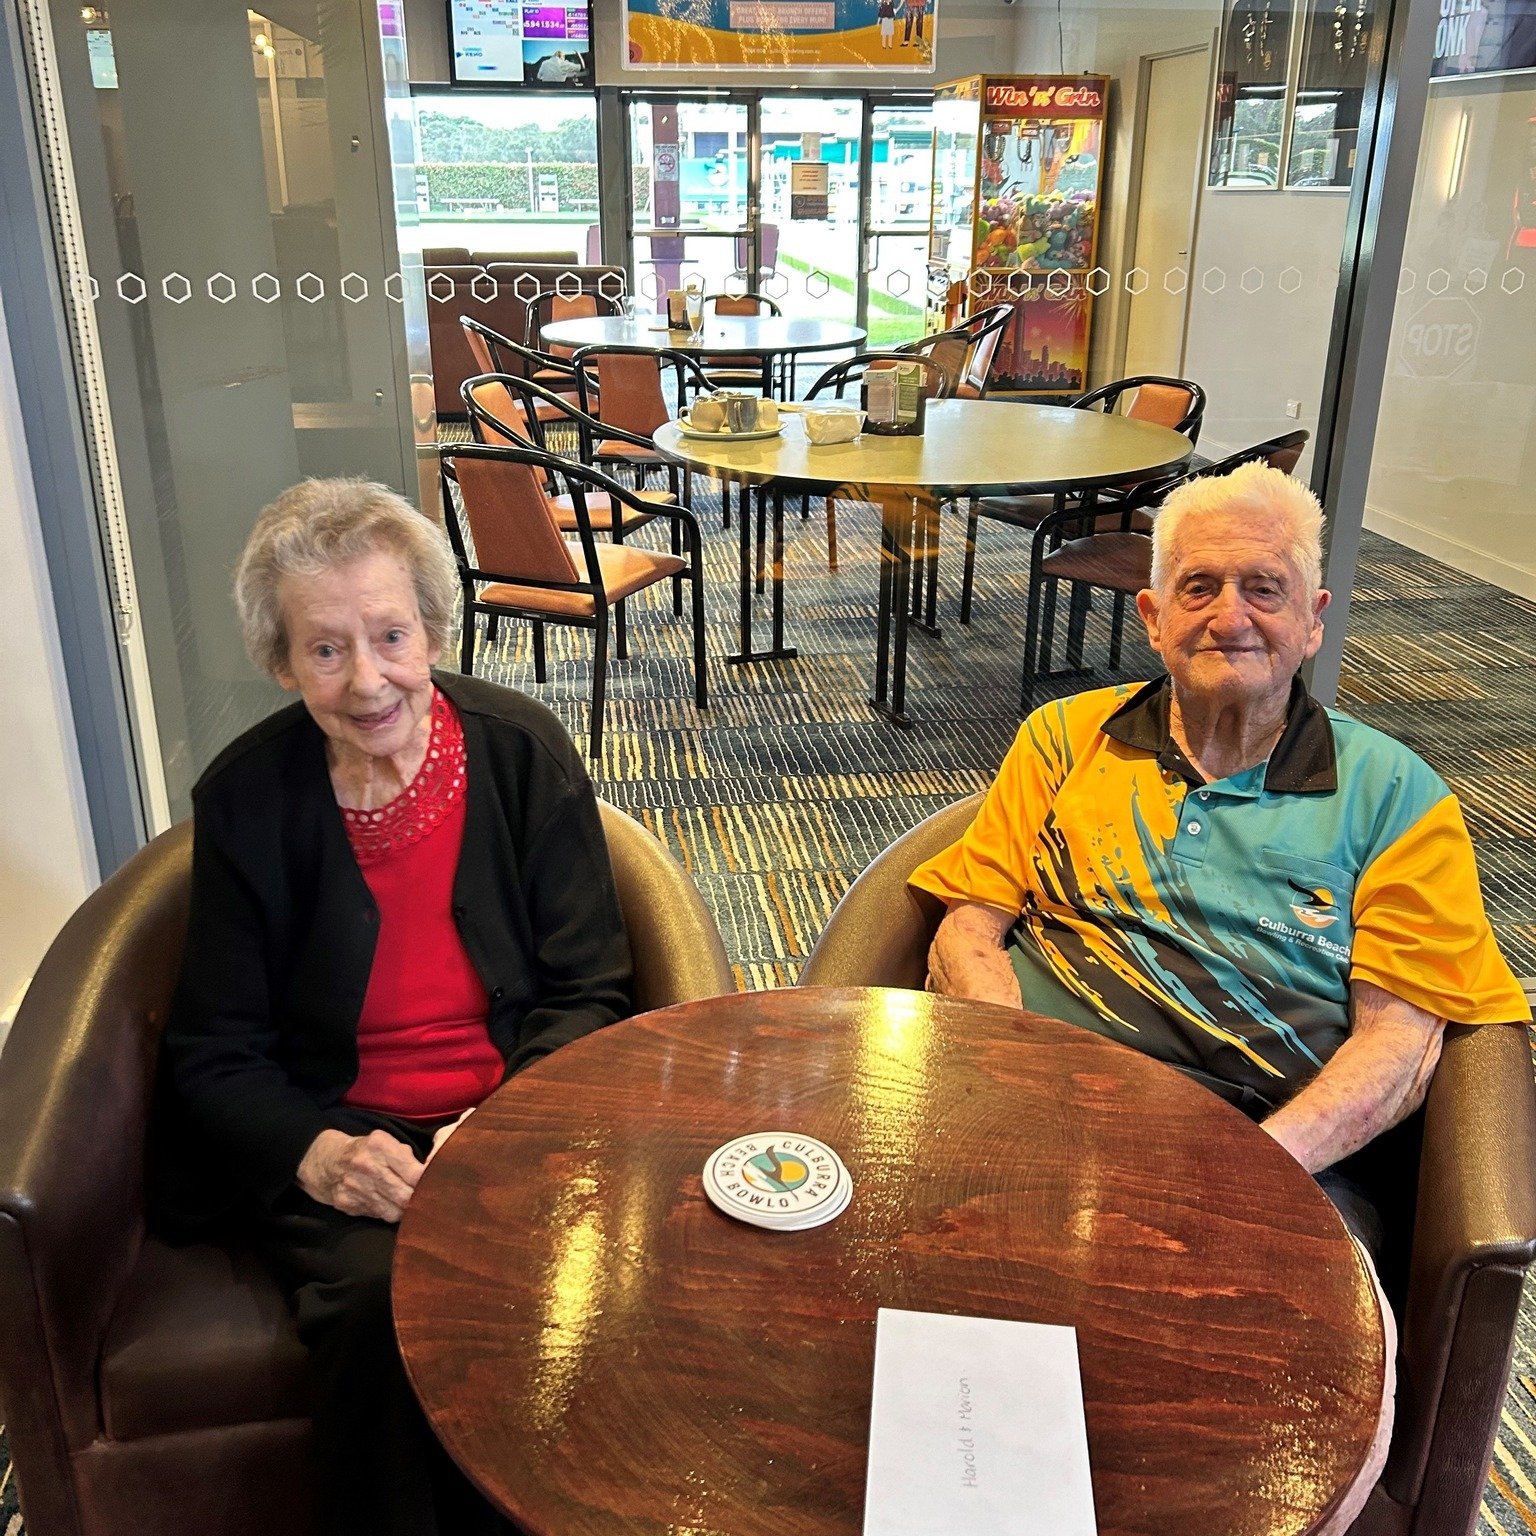 Management and Staff would like to give a huge Congratulations to two of our regular members Harold and Marion Forbes on their recent 73rd wedding aniversary and also a very Happy 98th Birthday to Harold for yesterday and 94th Birthday to Marion for 